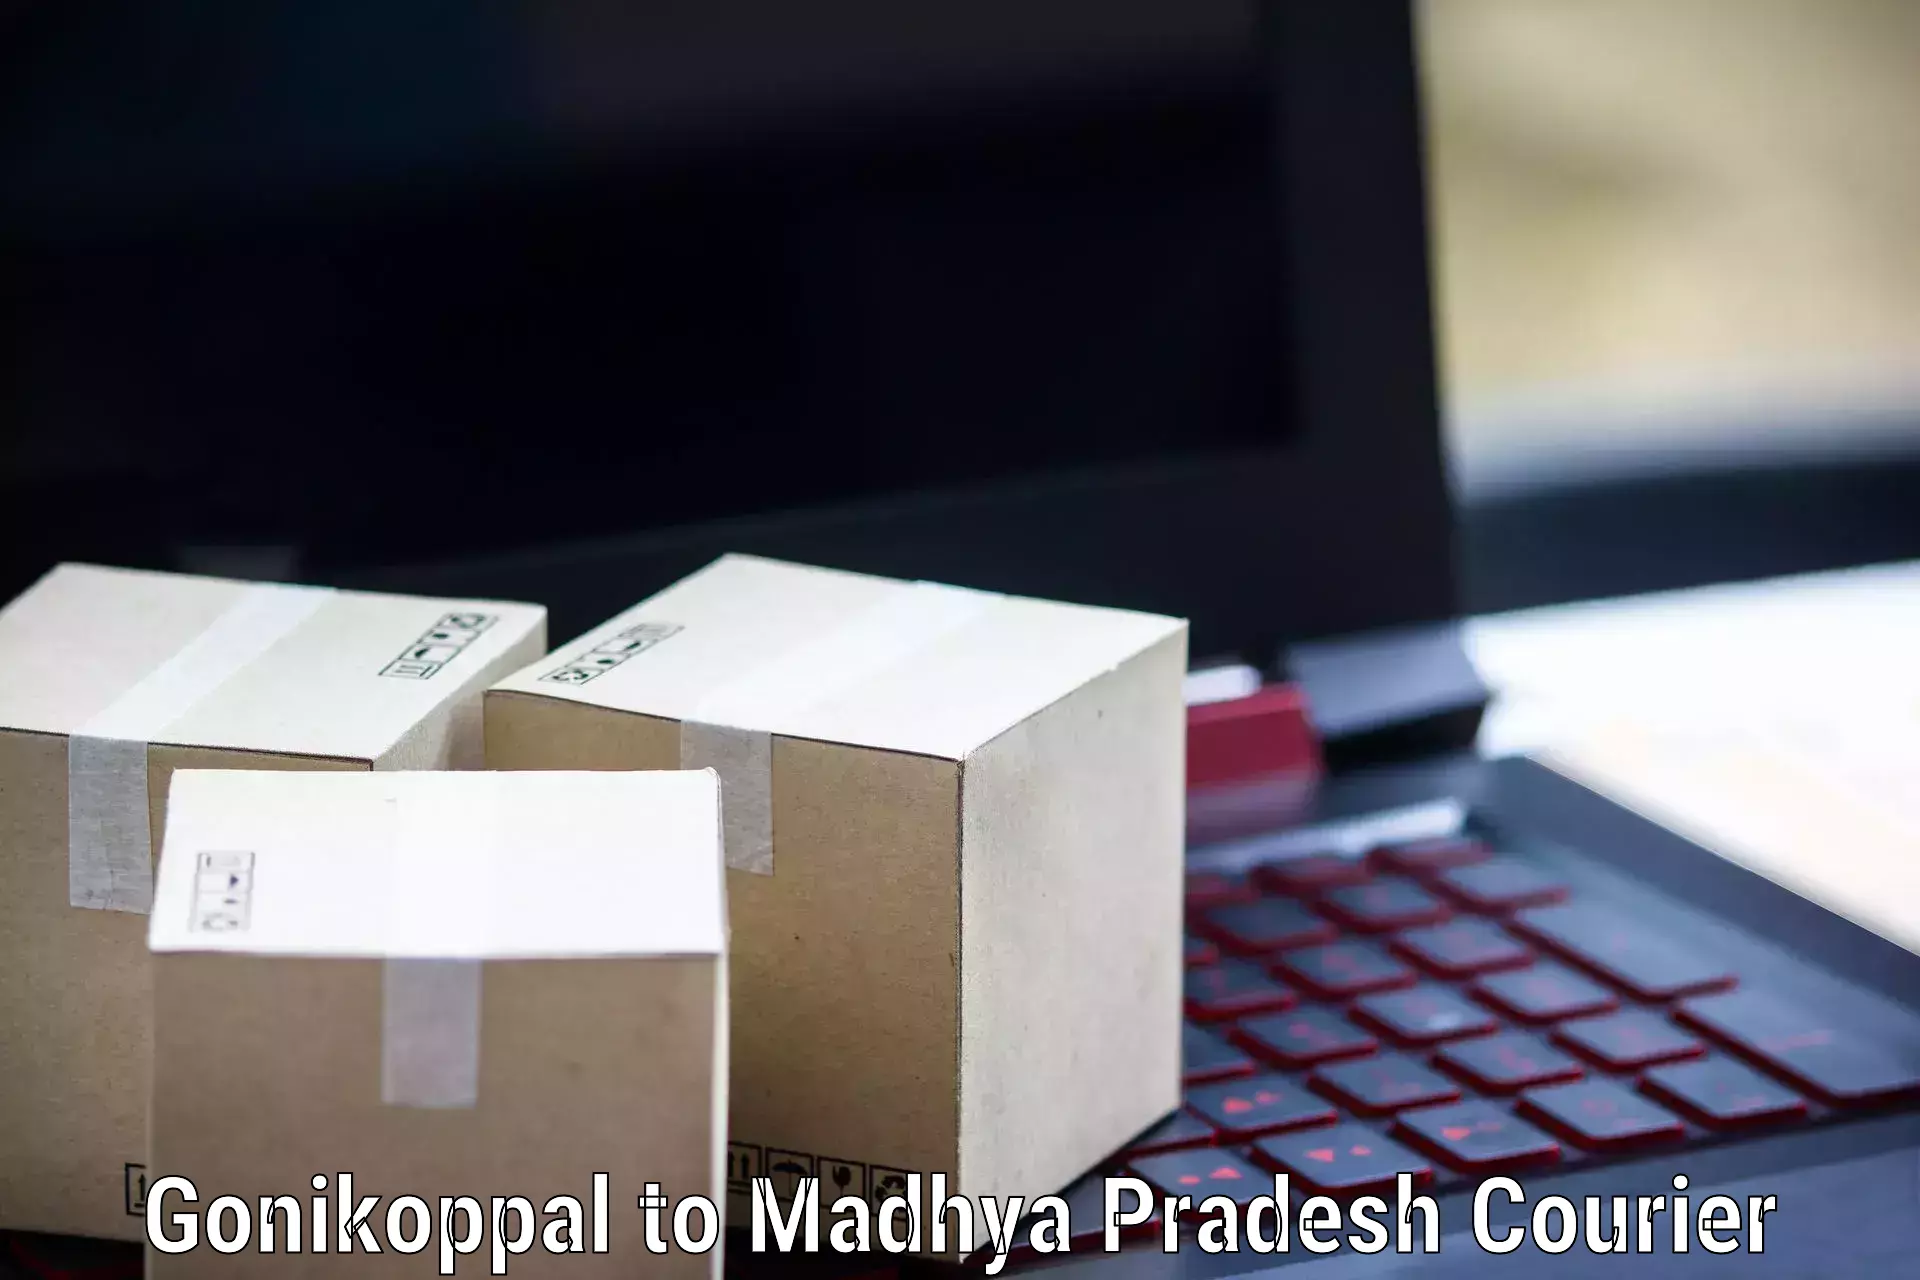 Affordable parcel service Gonikoppal to Madwas